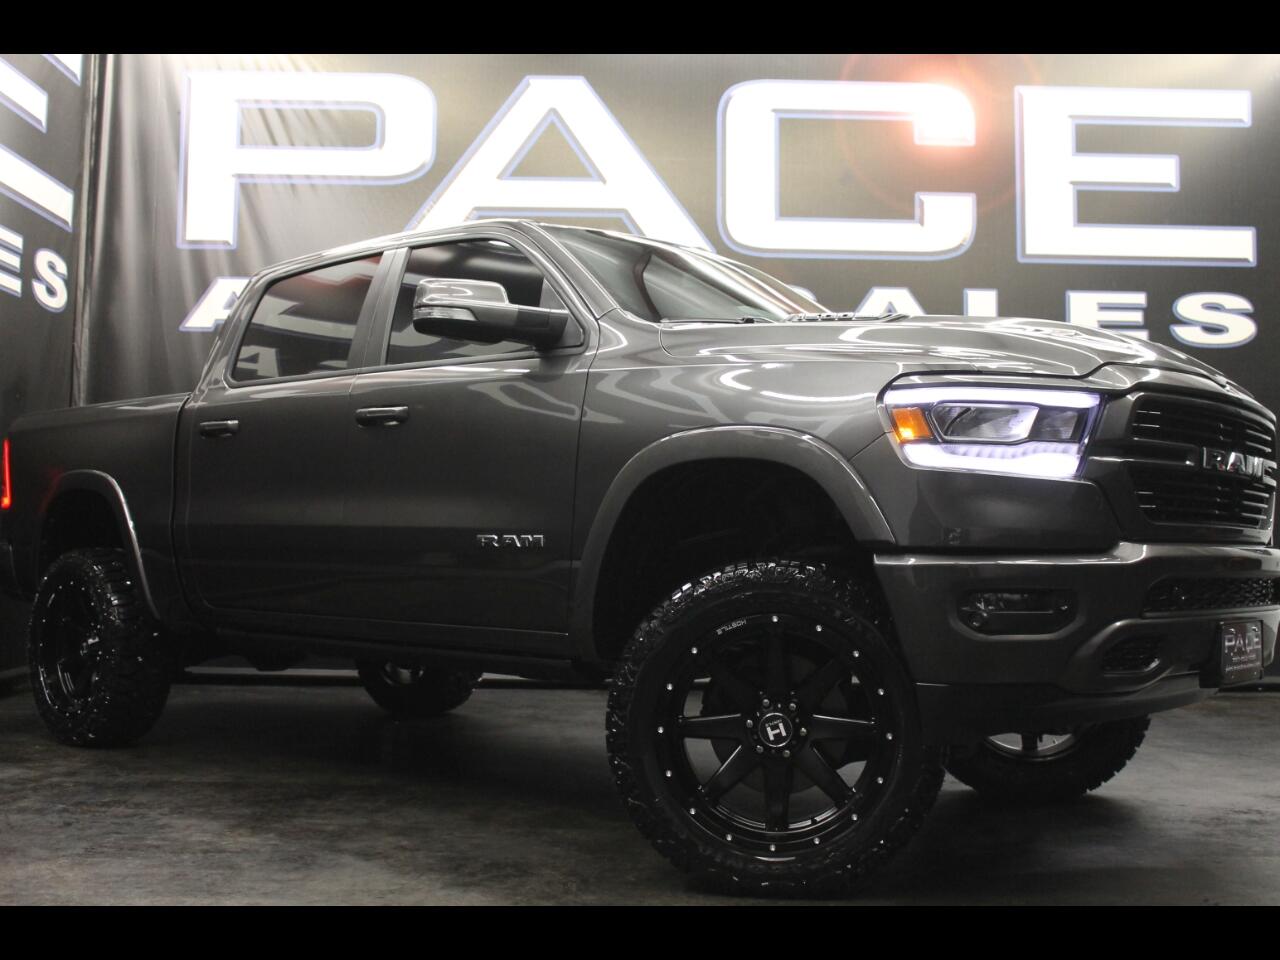 Used 2019 Ram 1500 Sold In Hattiesburg Ms 39402 Pace Auto Sales